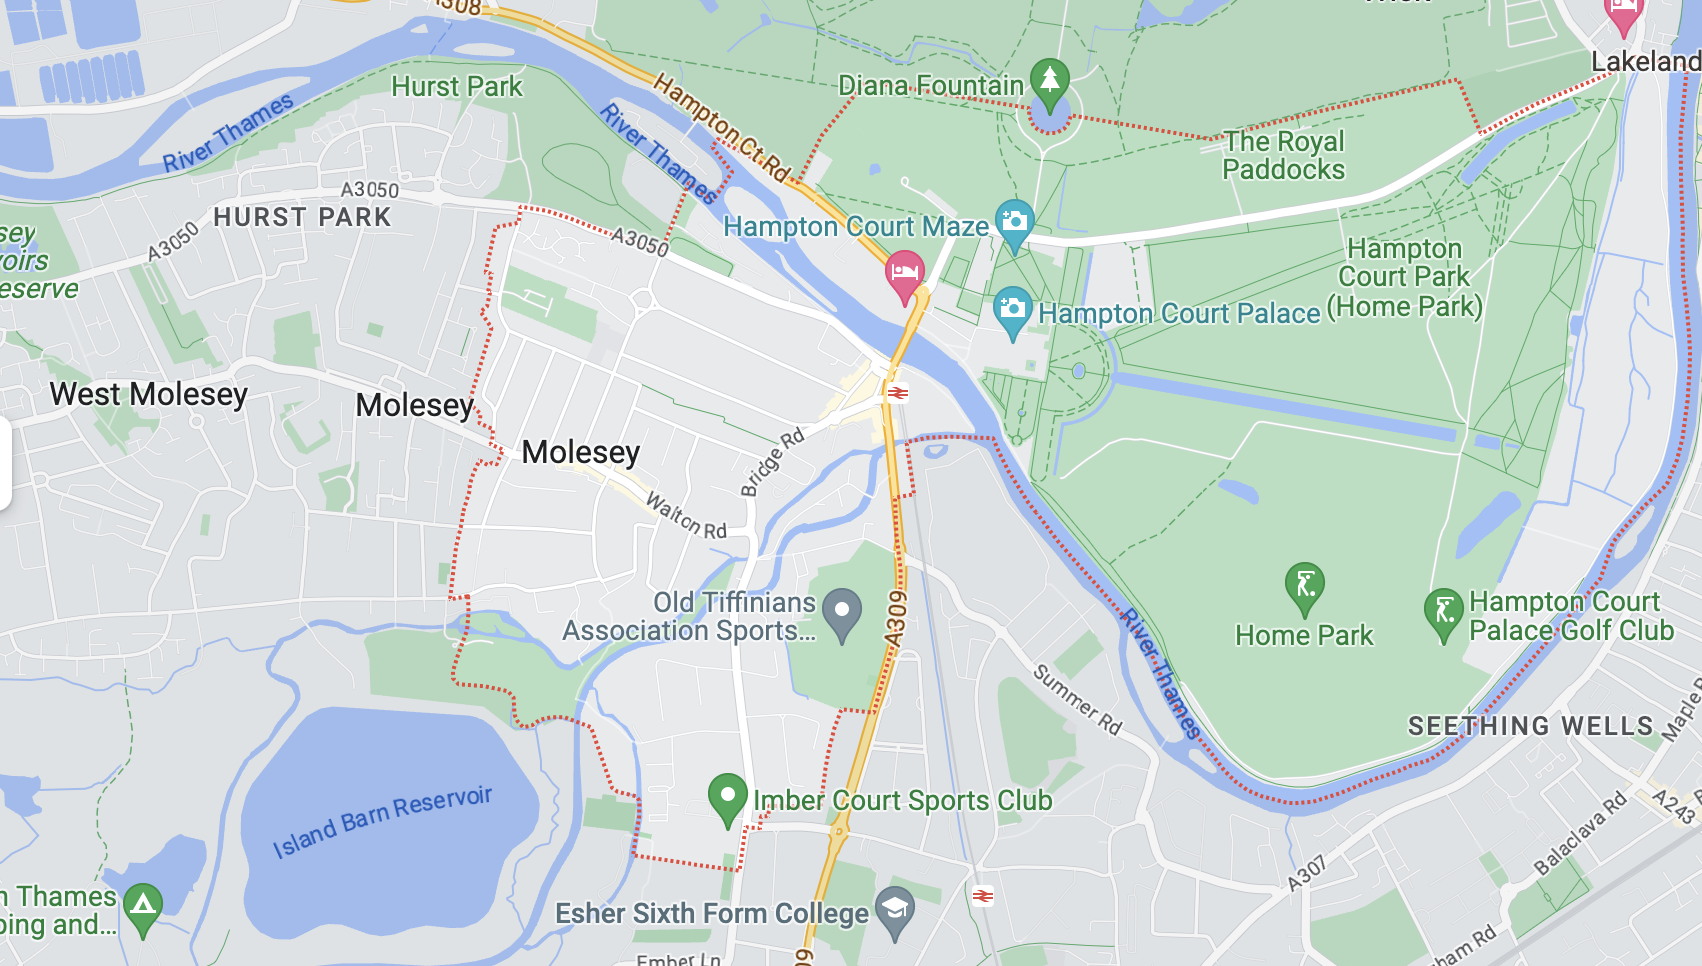 Copier Services East Molesey 